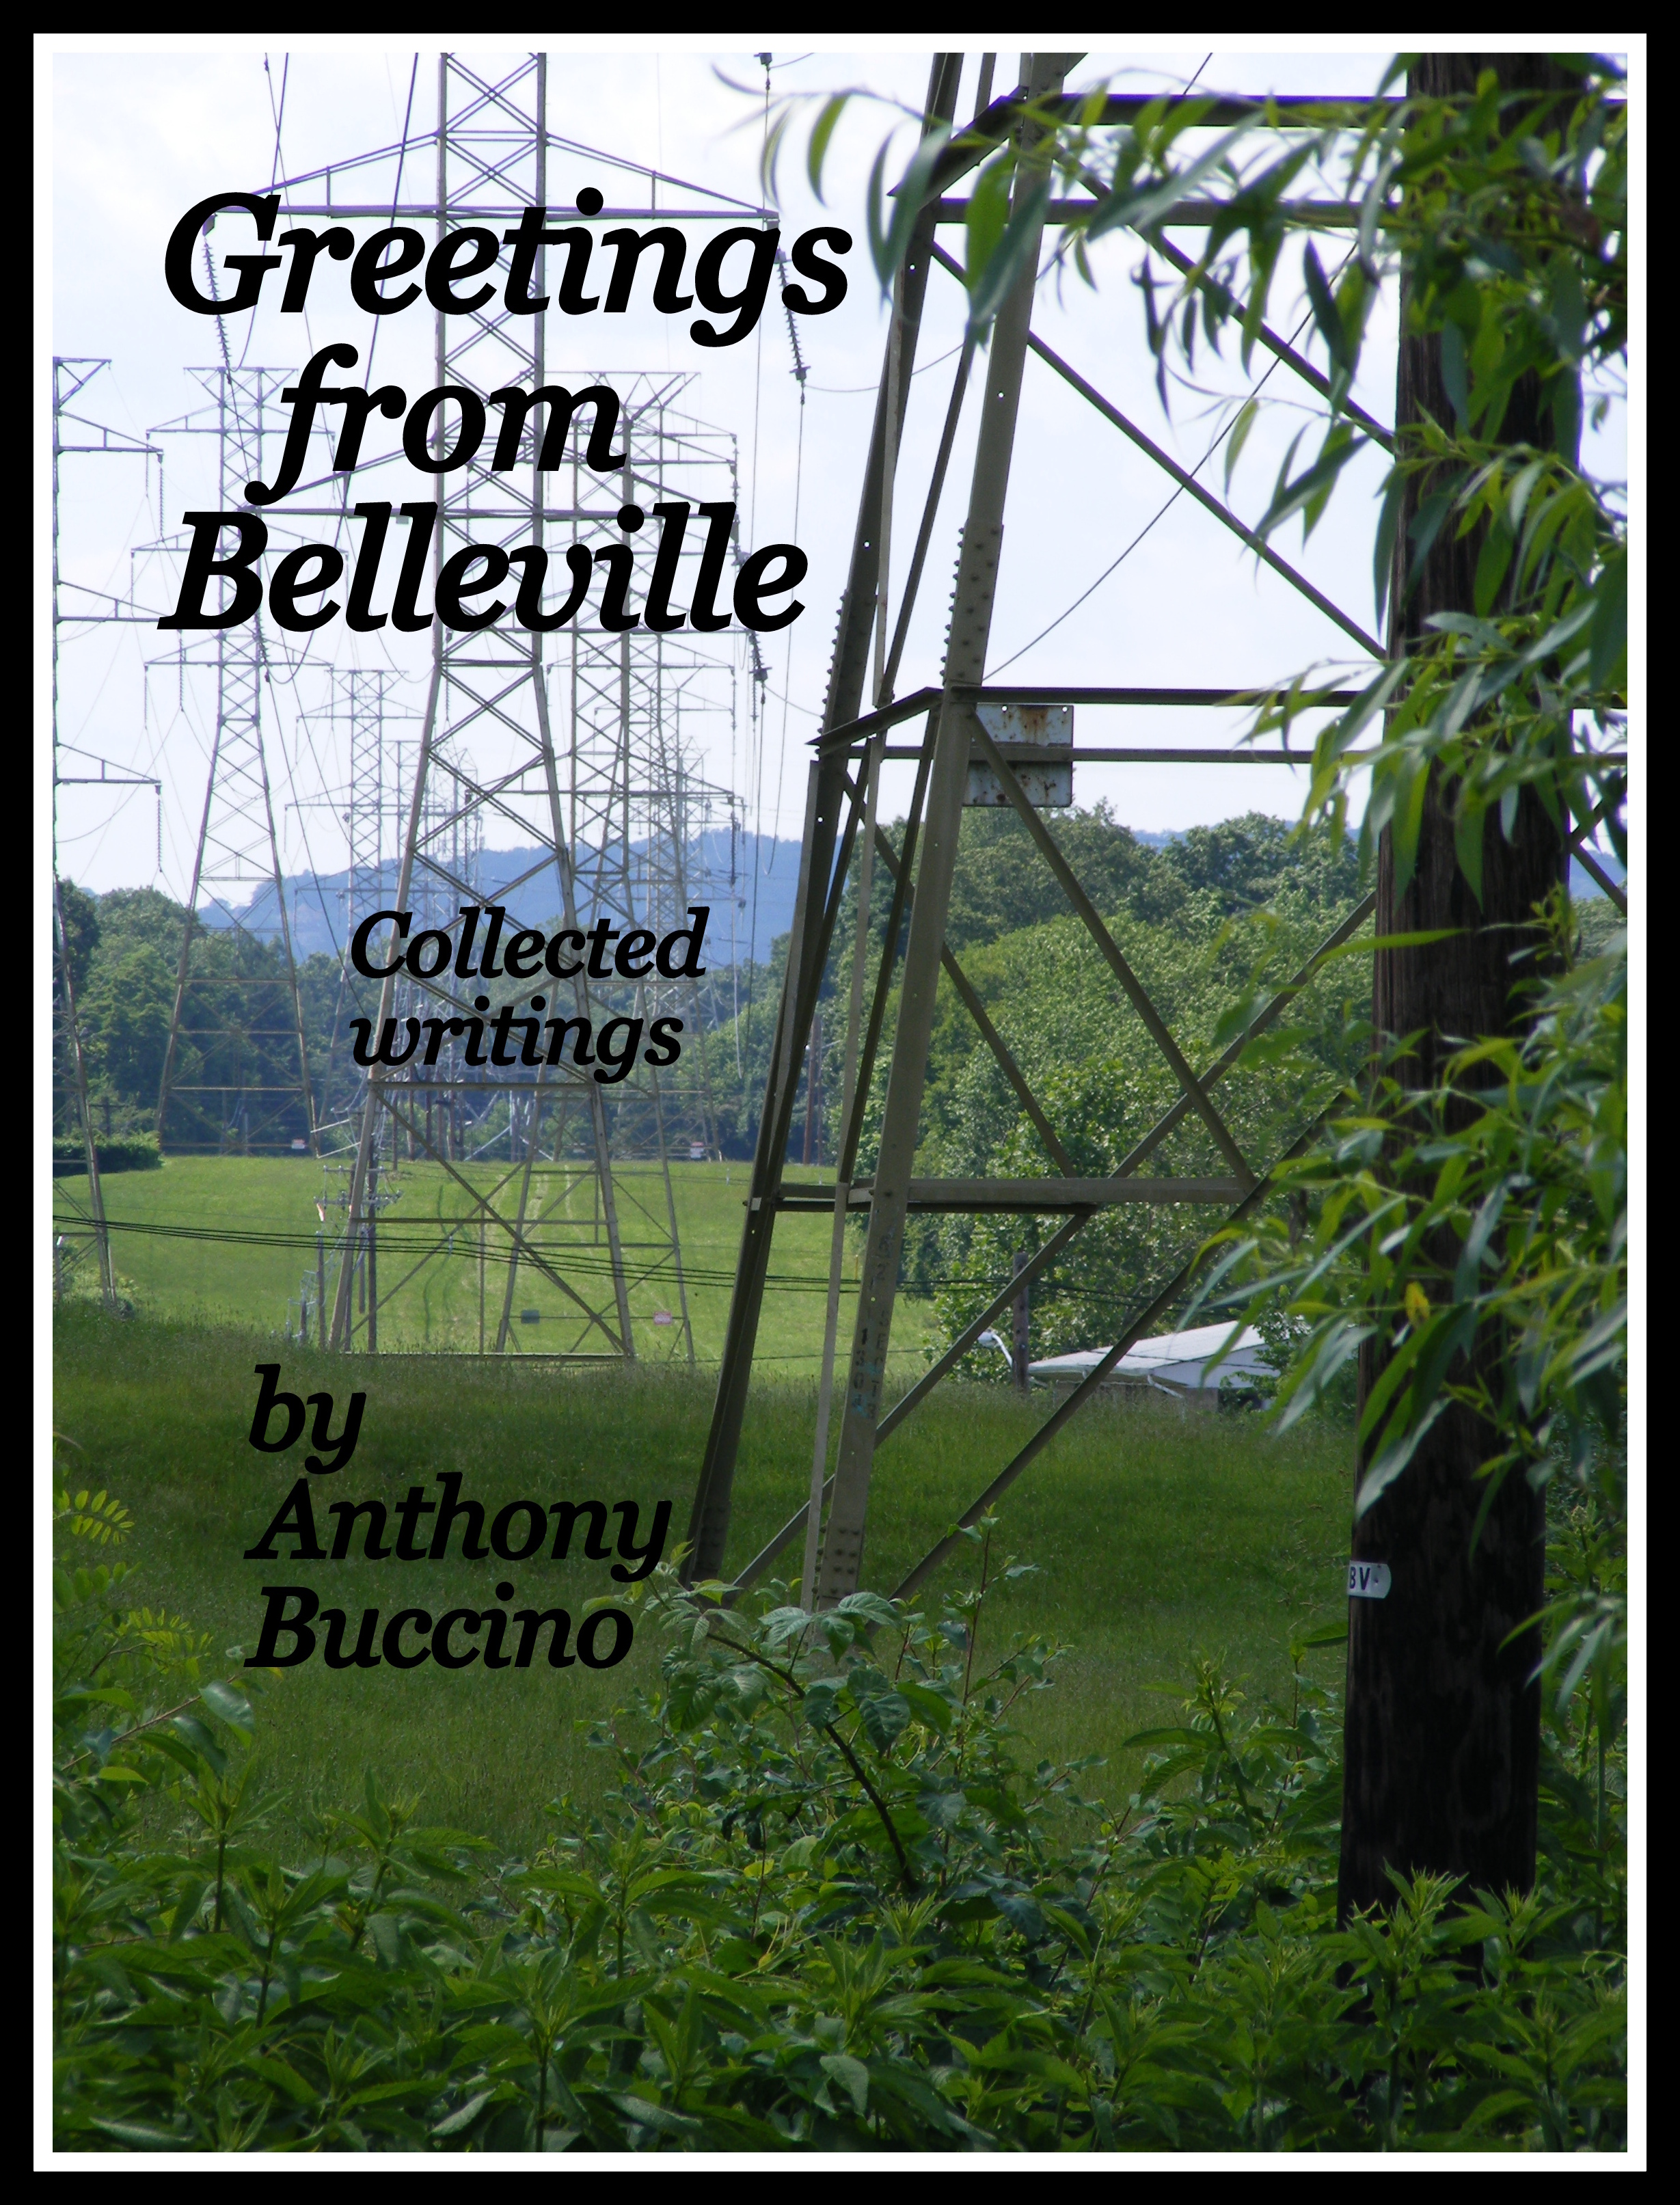 Greetings From Belleville, N.J. - Collected writings by Anthony Buccino